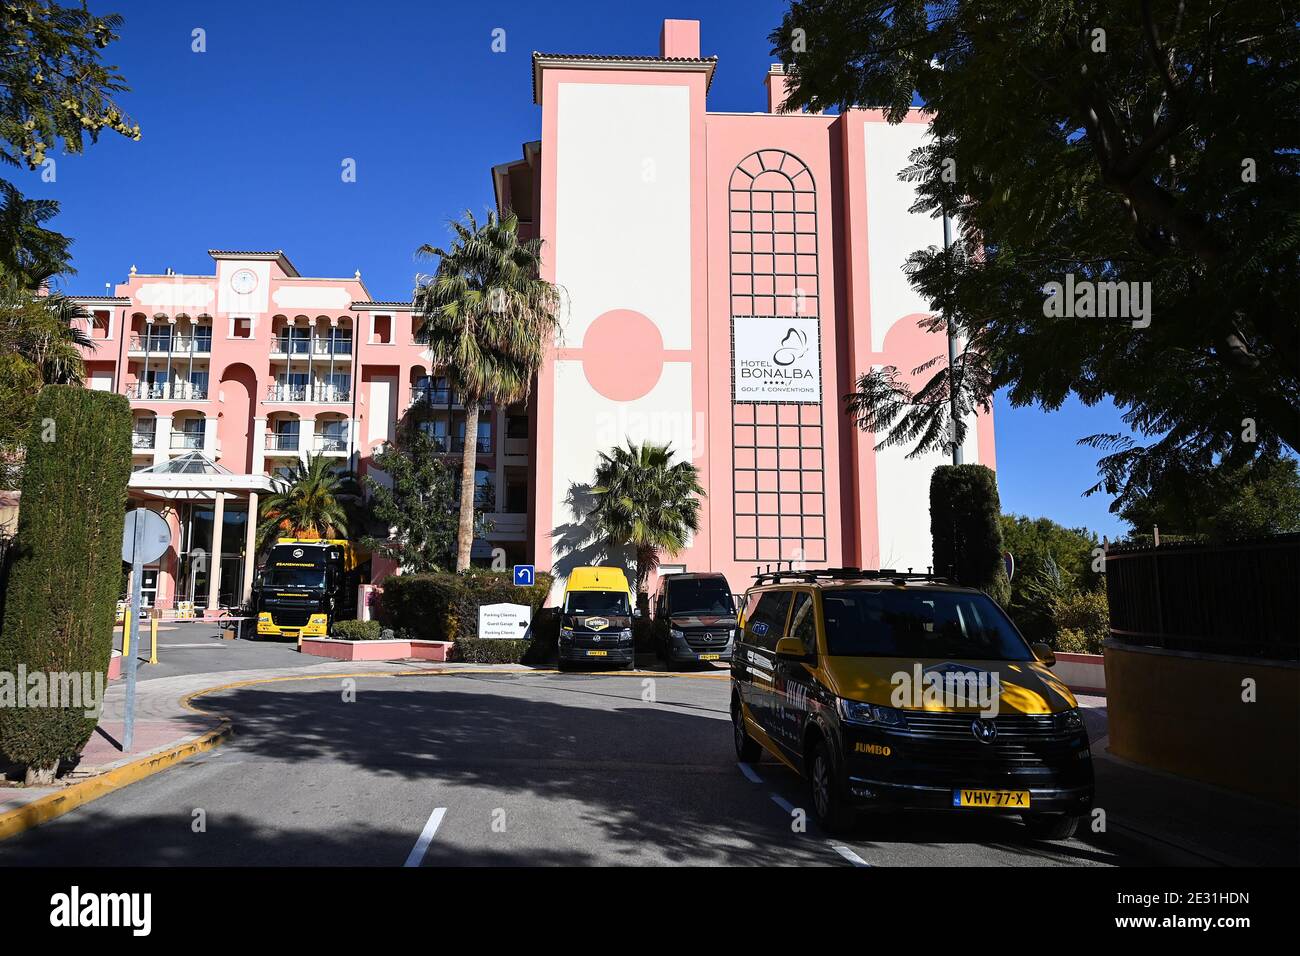 Illustration shows the 'Bonalba Alicante' hotel where Team Jumbo-Visma is  staying during their training stage, in Alicante, in Spain, Saturday 16 Jan  Stock Photo - Alamy